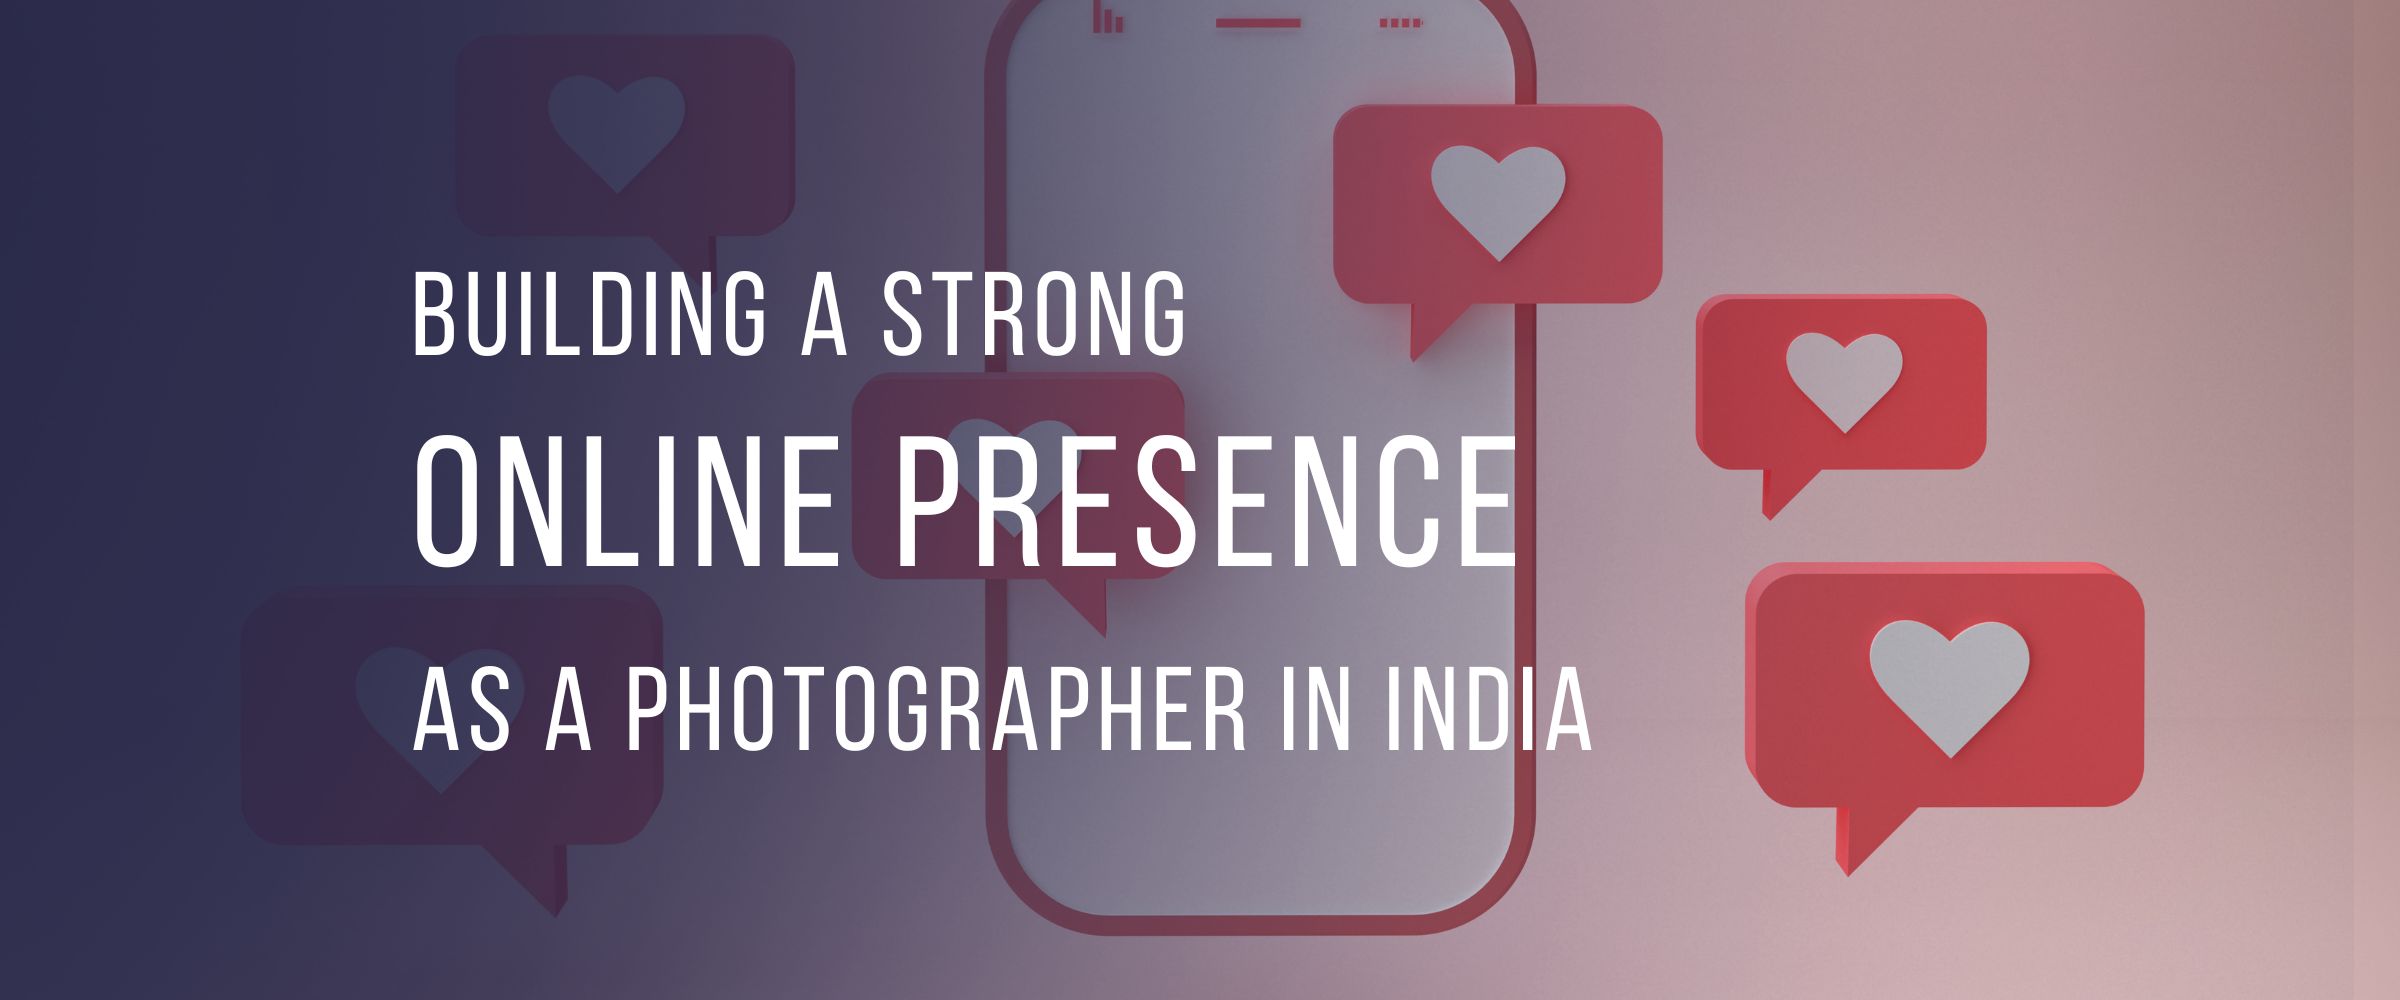 Building a Strong Online Presence as a Photographer